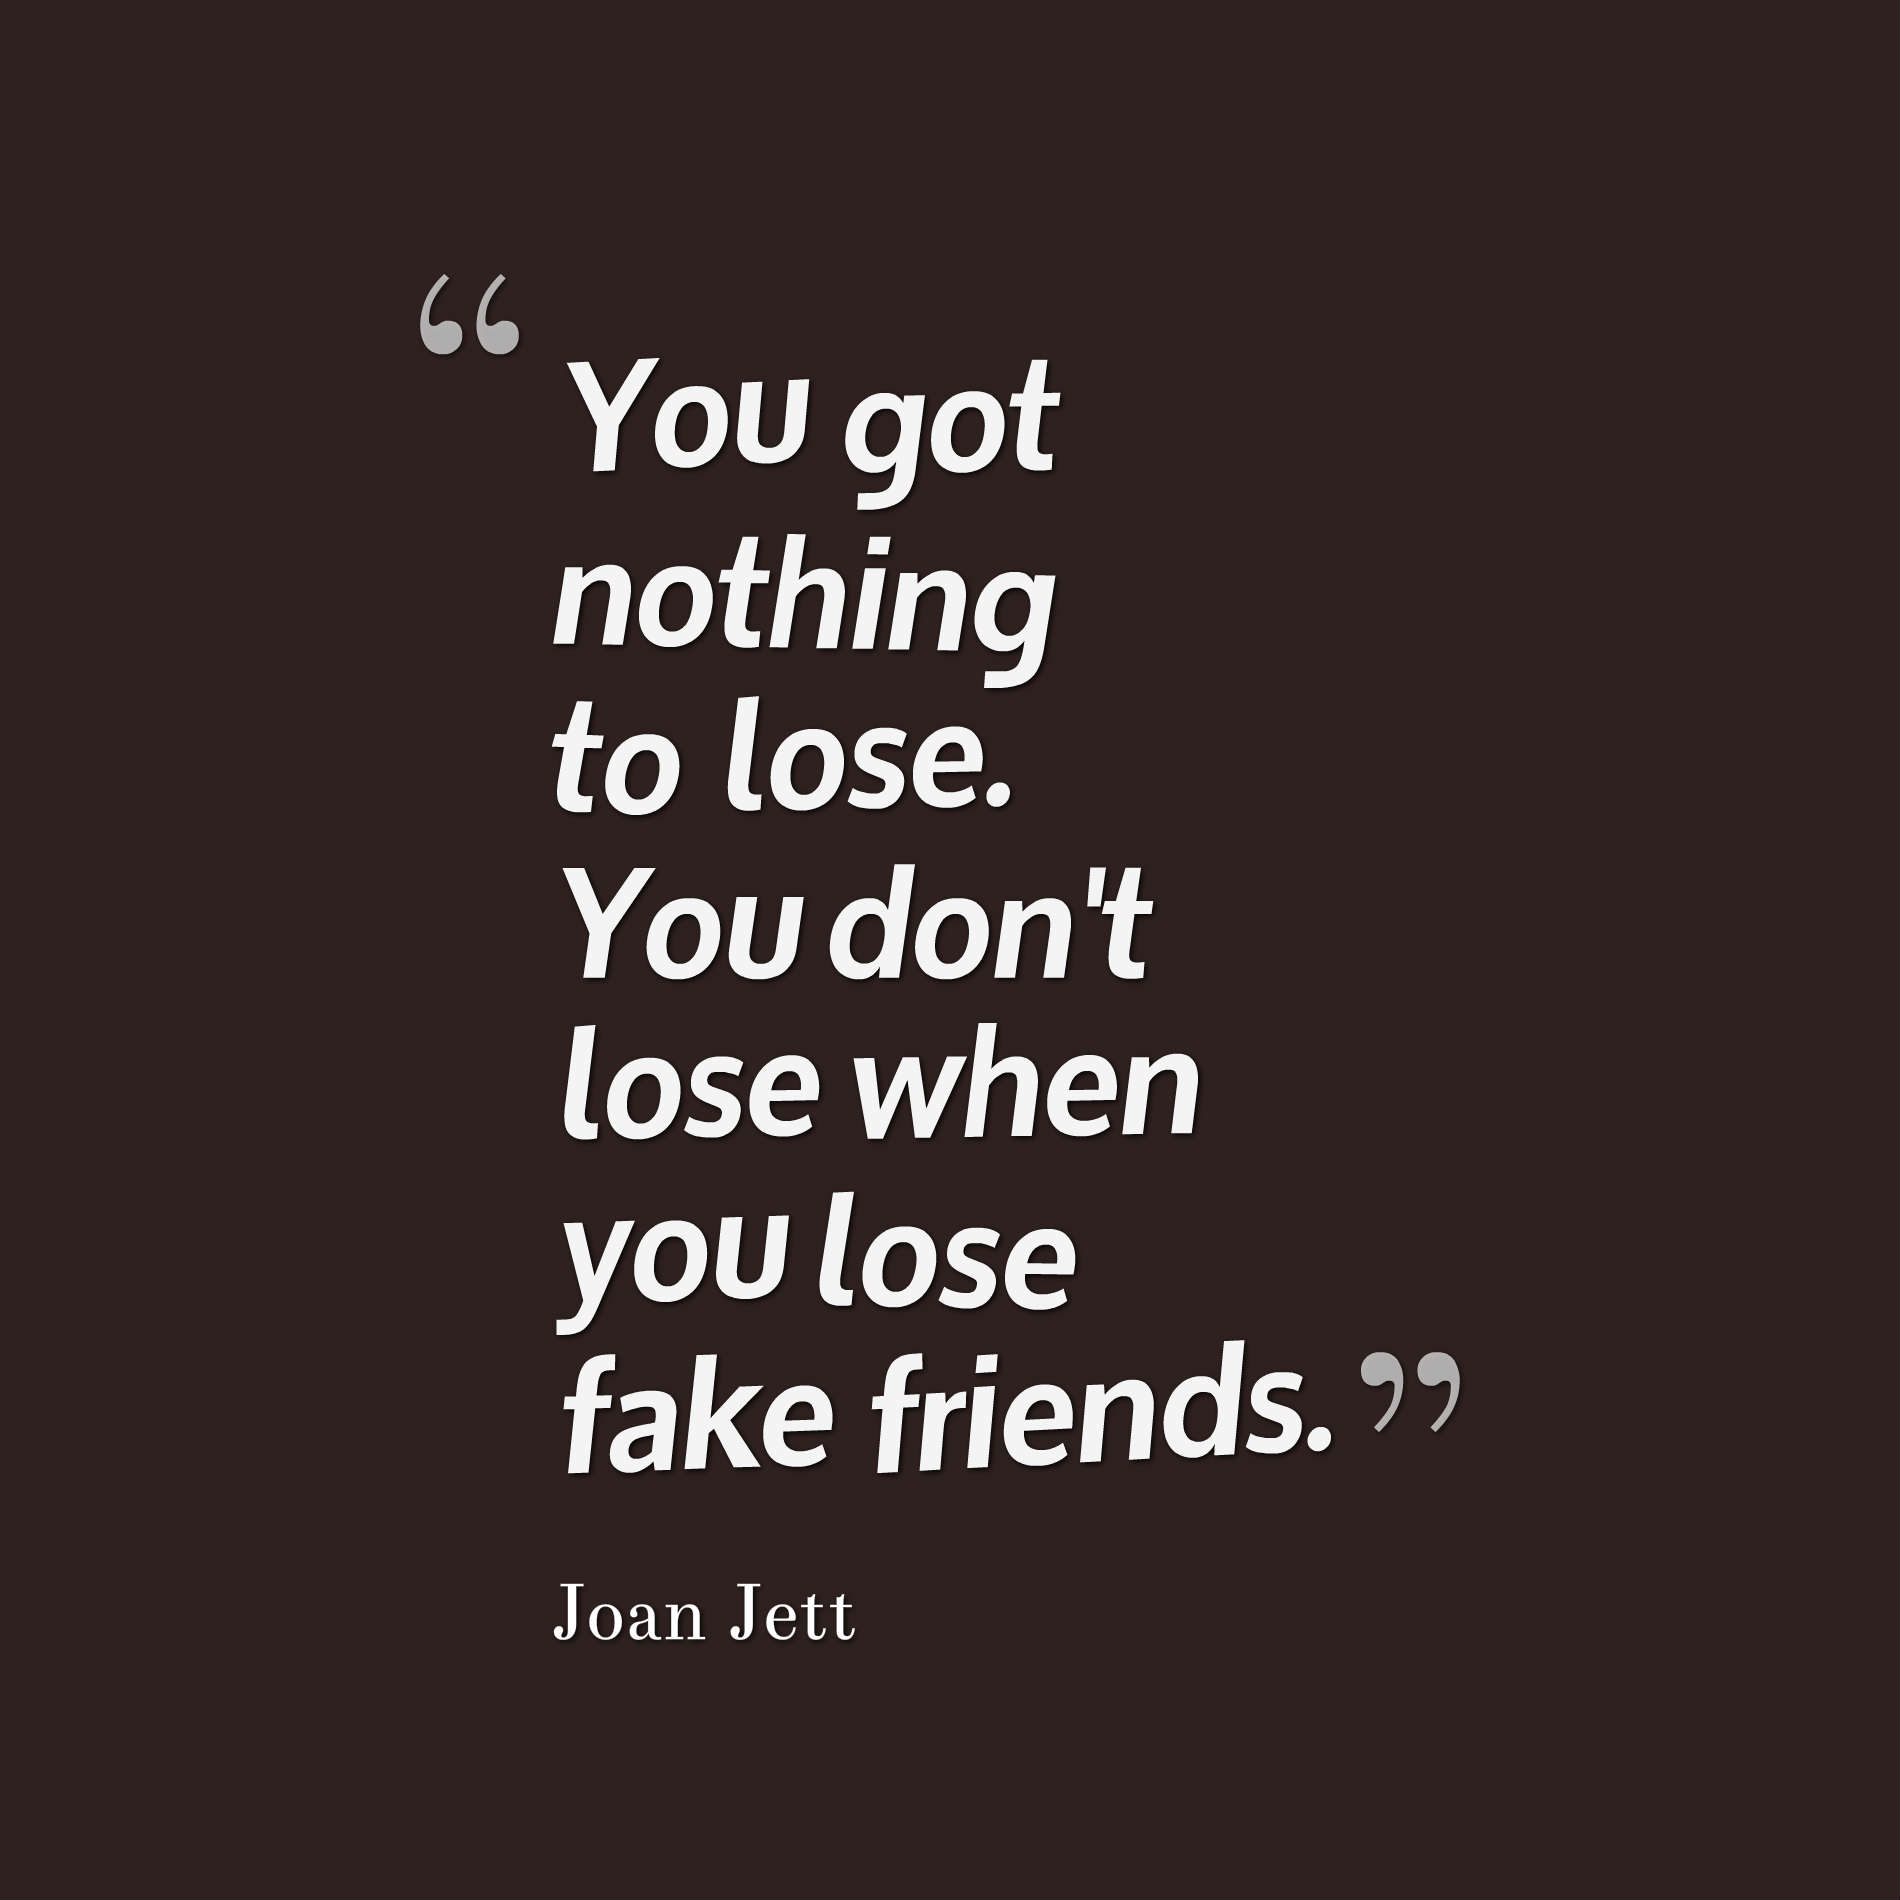 Fake People Quotes And Sayings. 